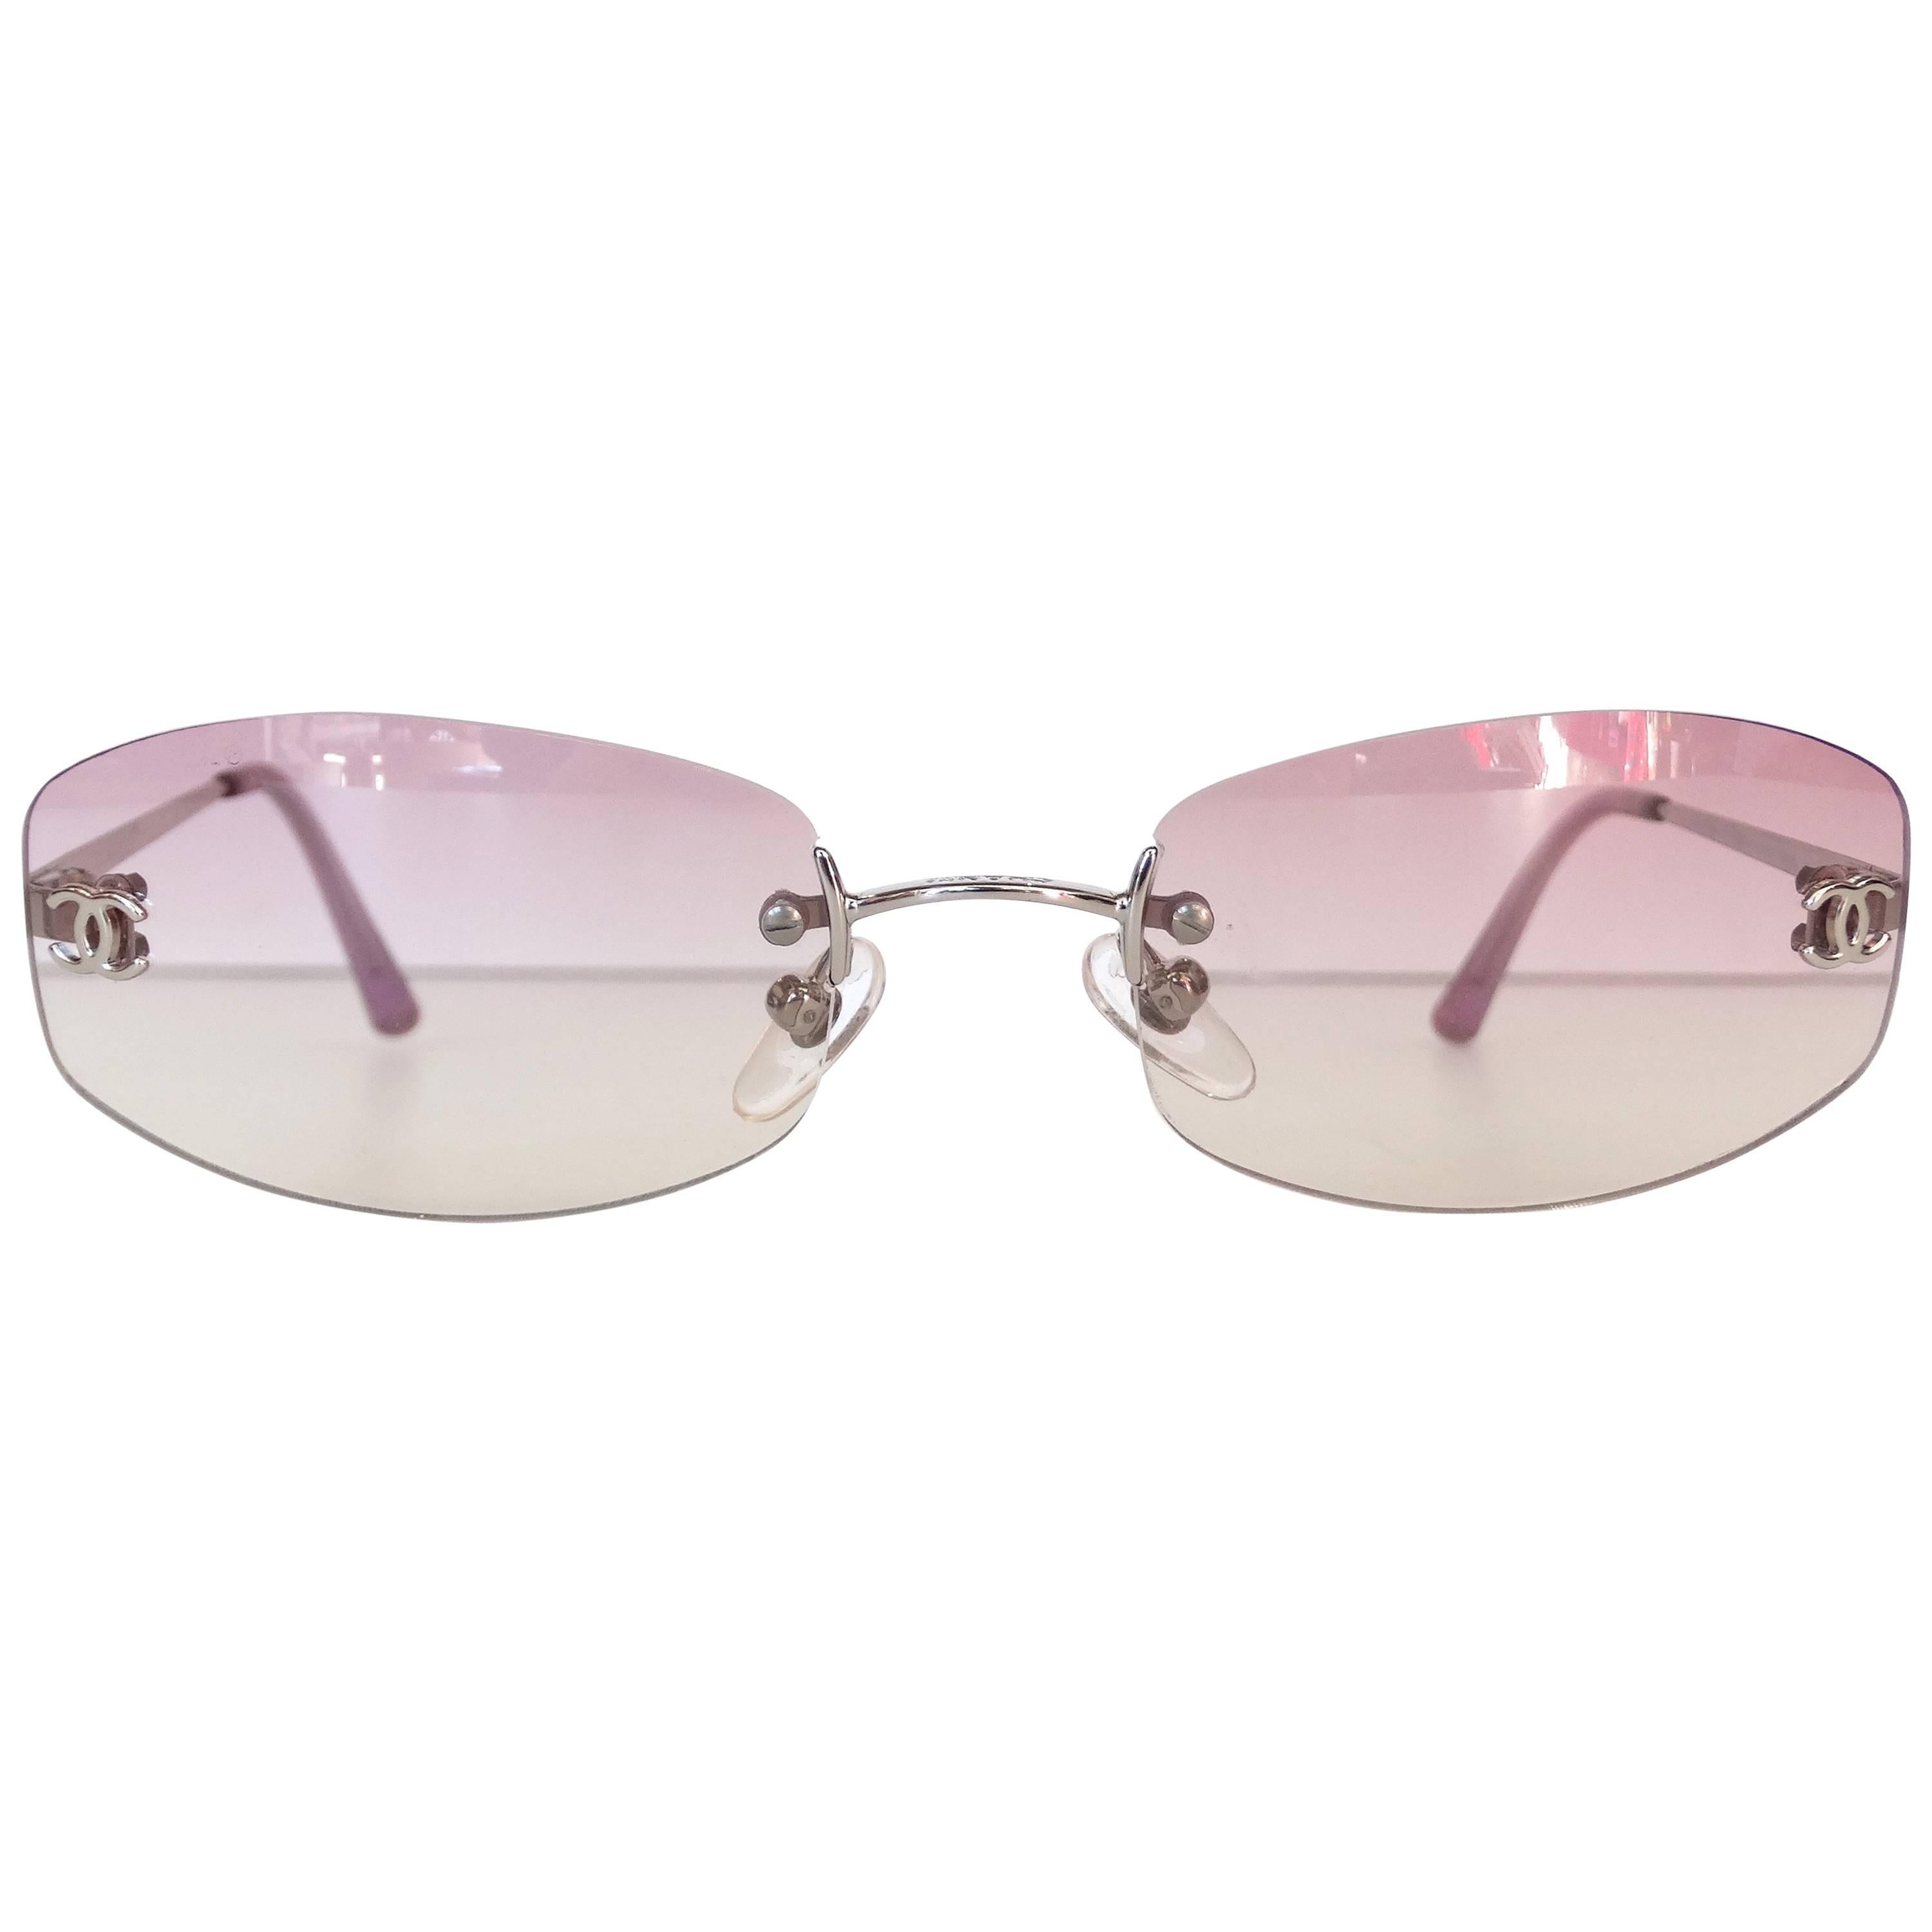 2000s Chanel Pink Ombre Sunglasses